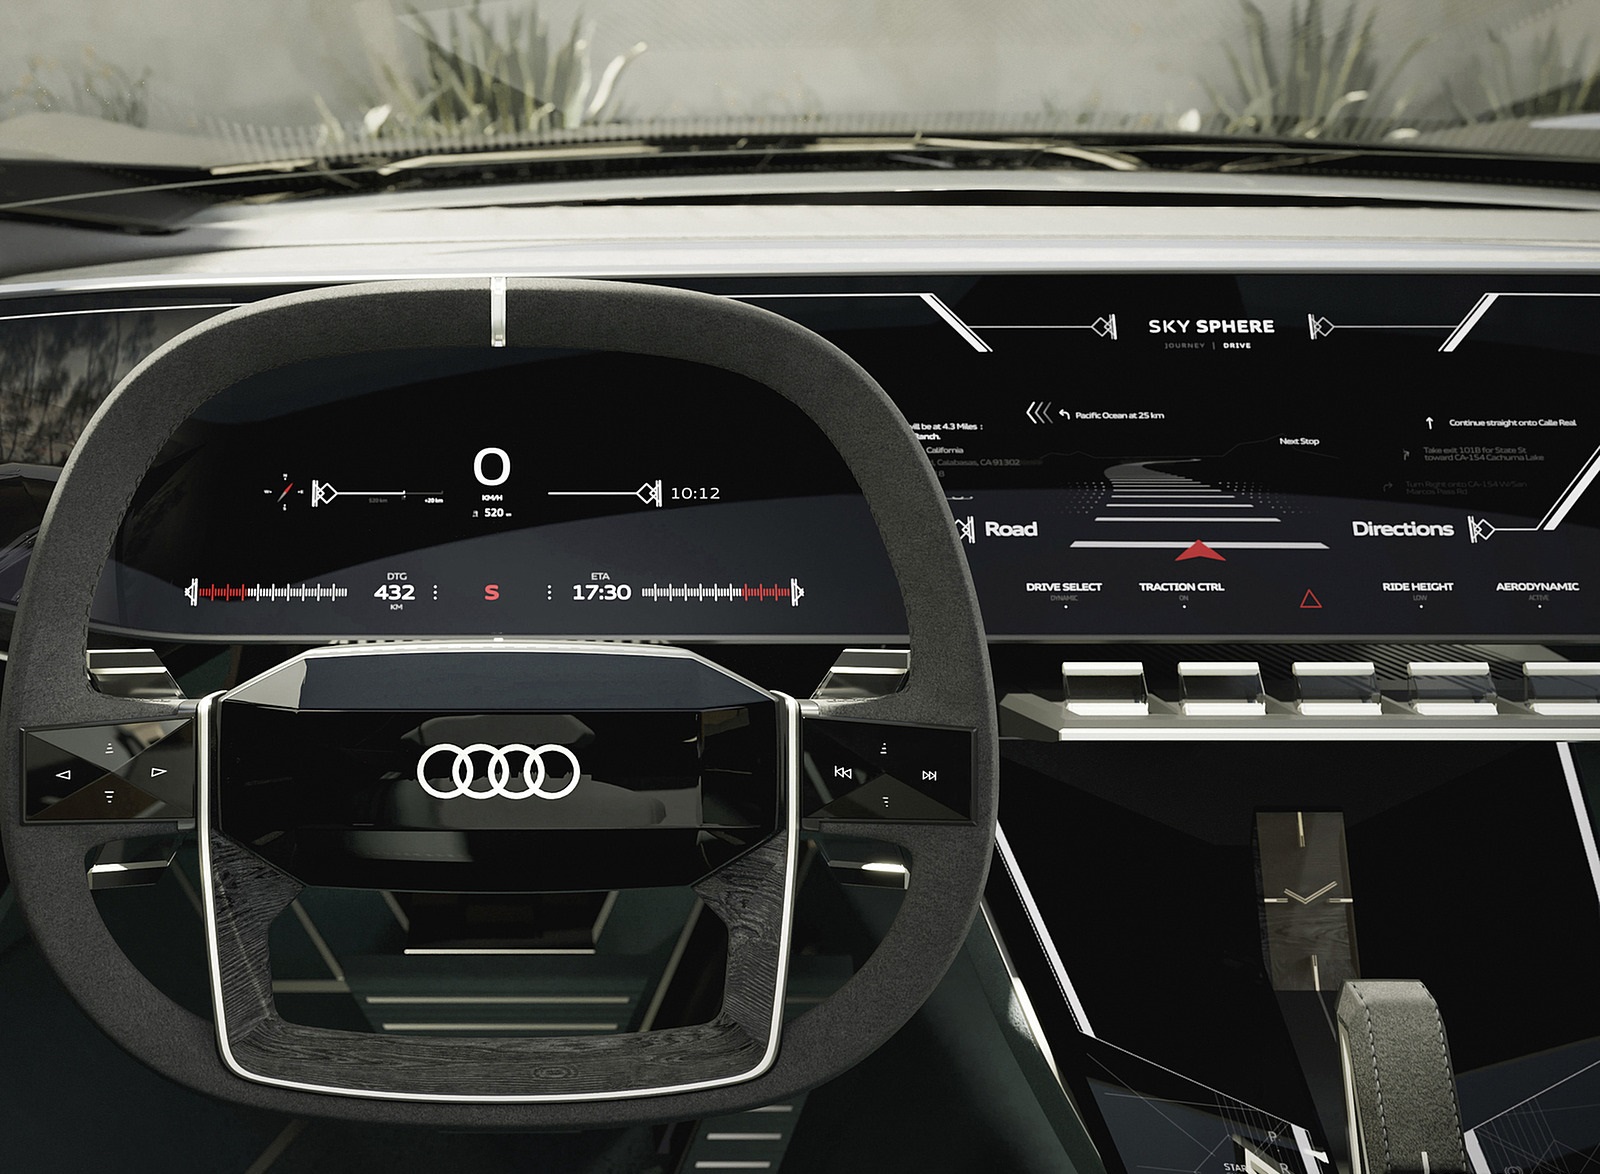 2021 Audi Skysphere Concept Interior Cockpit Wallpapers #60 of 91